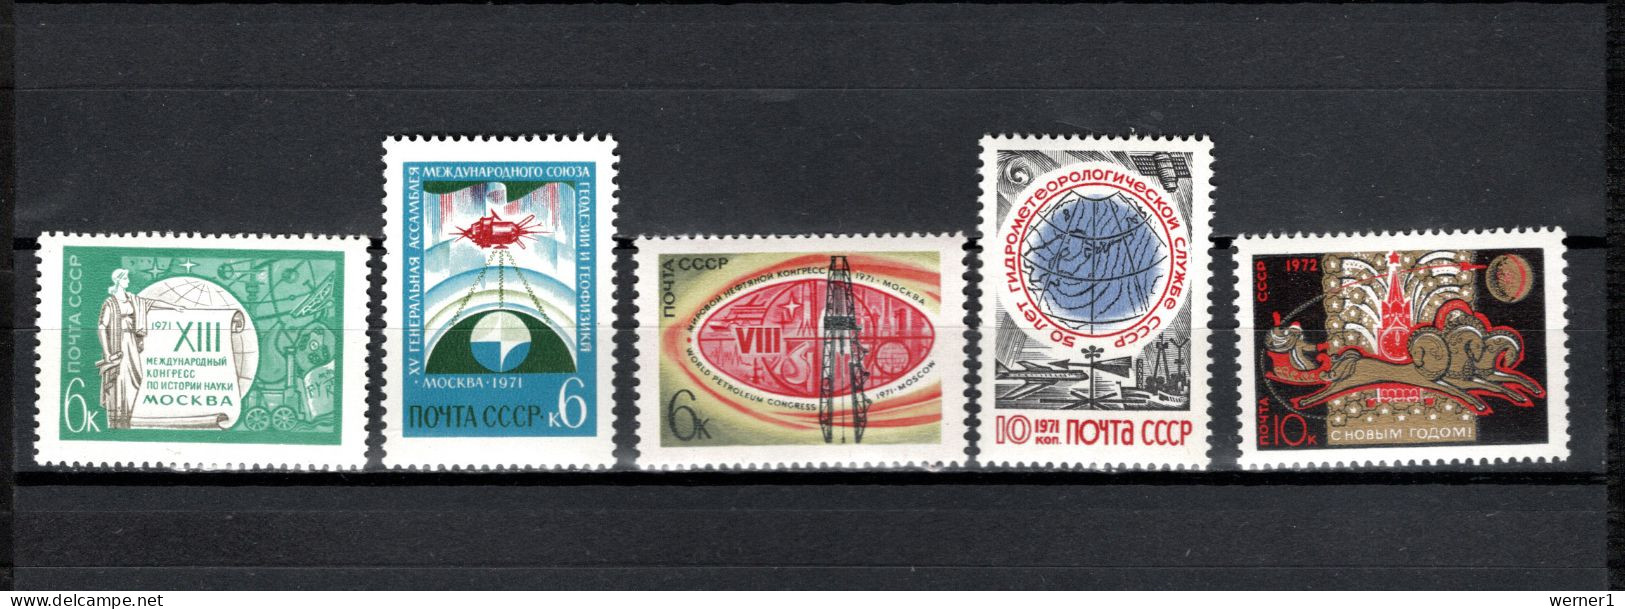 USSR Russia 1971 Space, International Congress Moscow, Meteorology, New Year 5 Stamps MNH - Russia & USSR